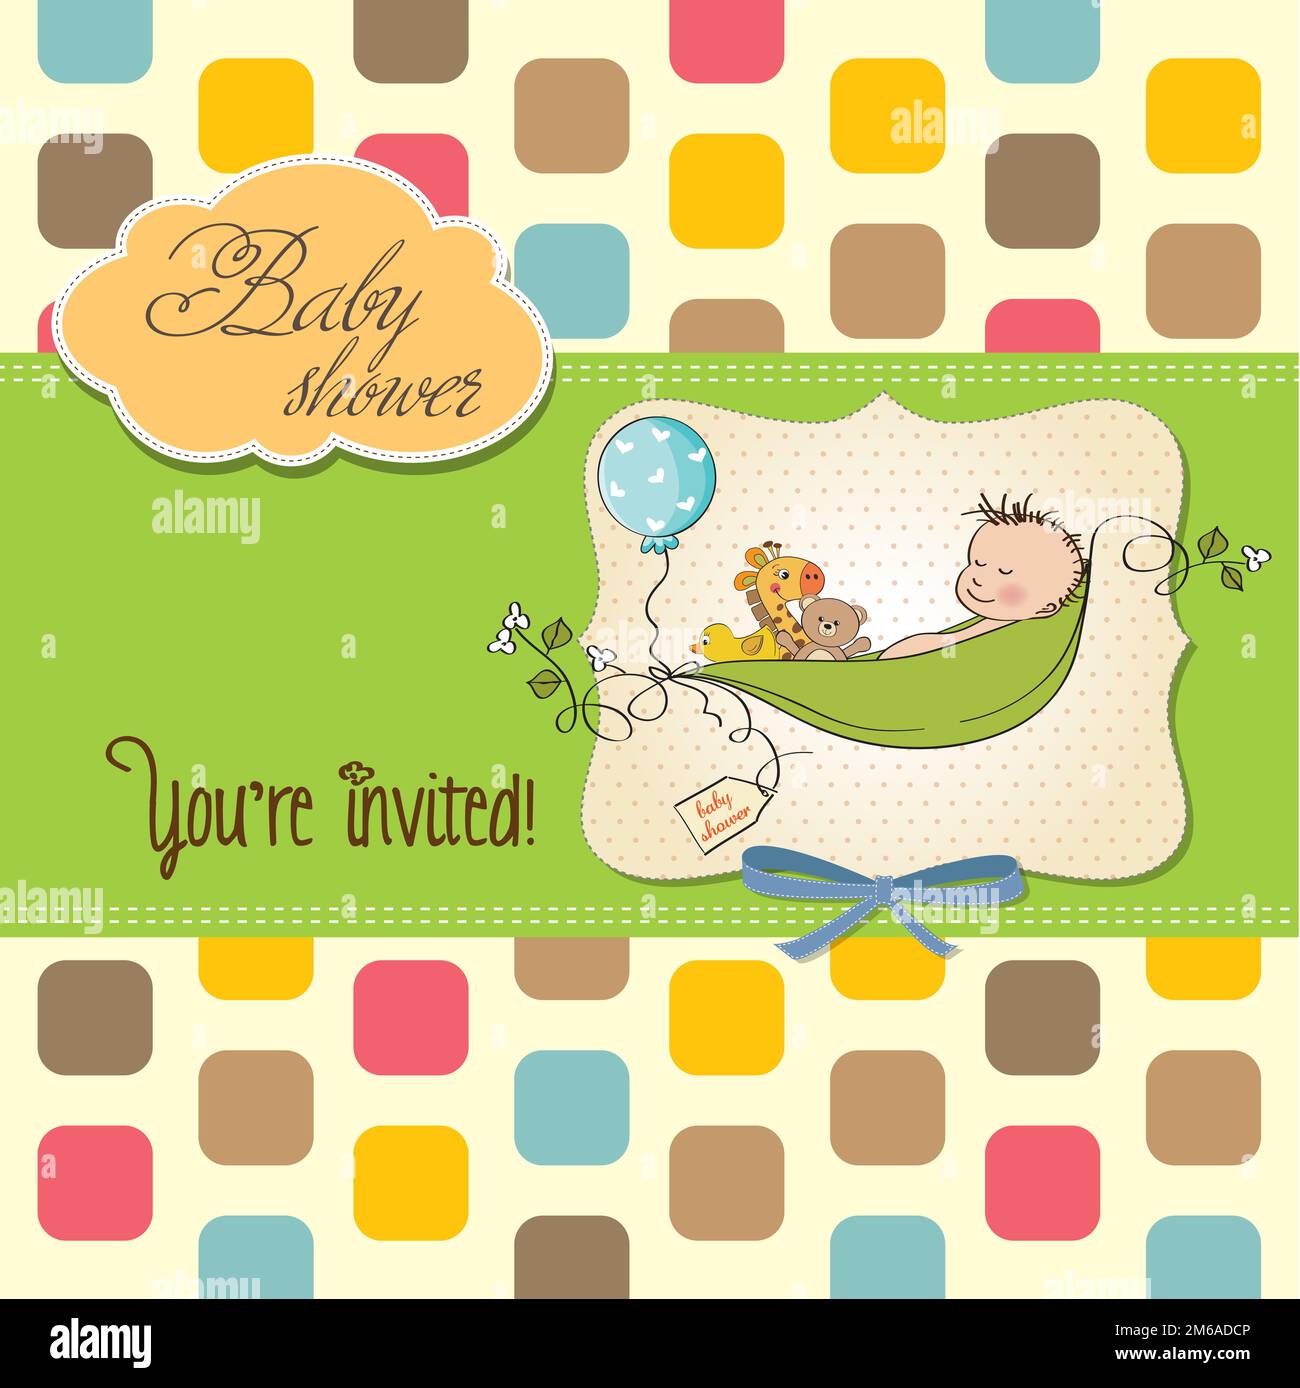 Little boy sleeping in a pea been, baby shower card Stock Photo